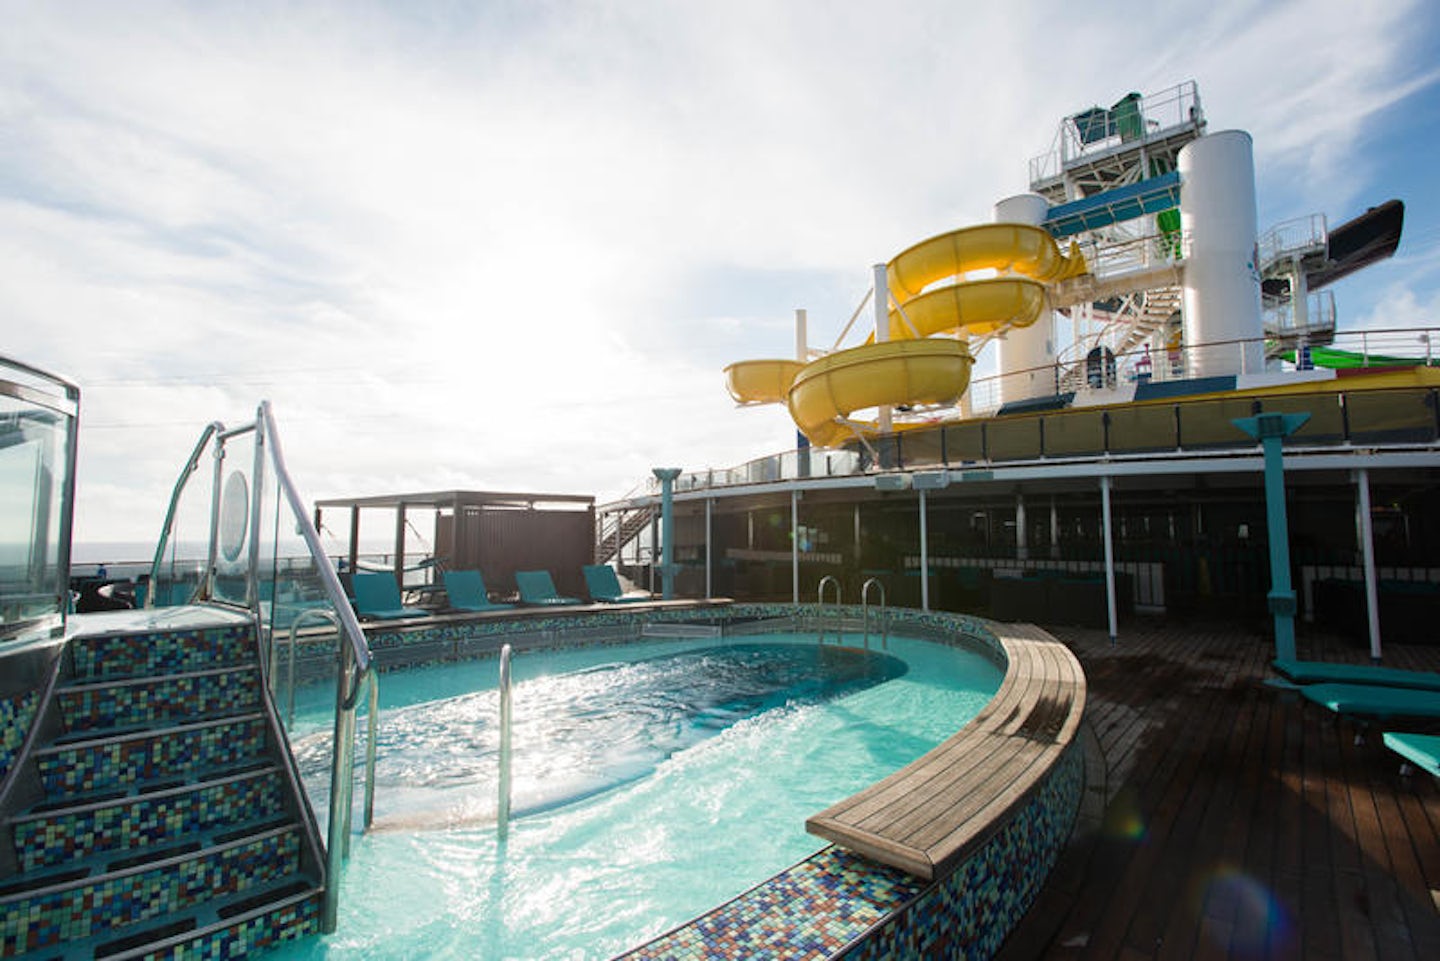 The Serenity Hot Tubs on Carnival Pride